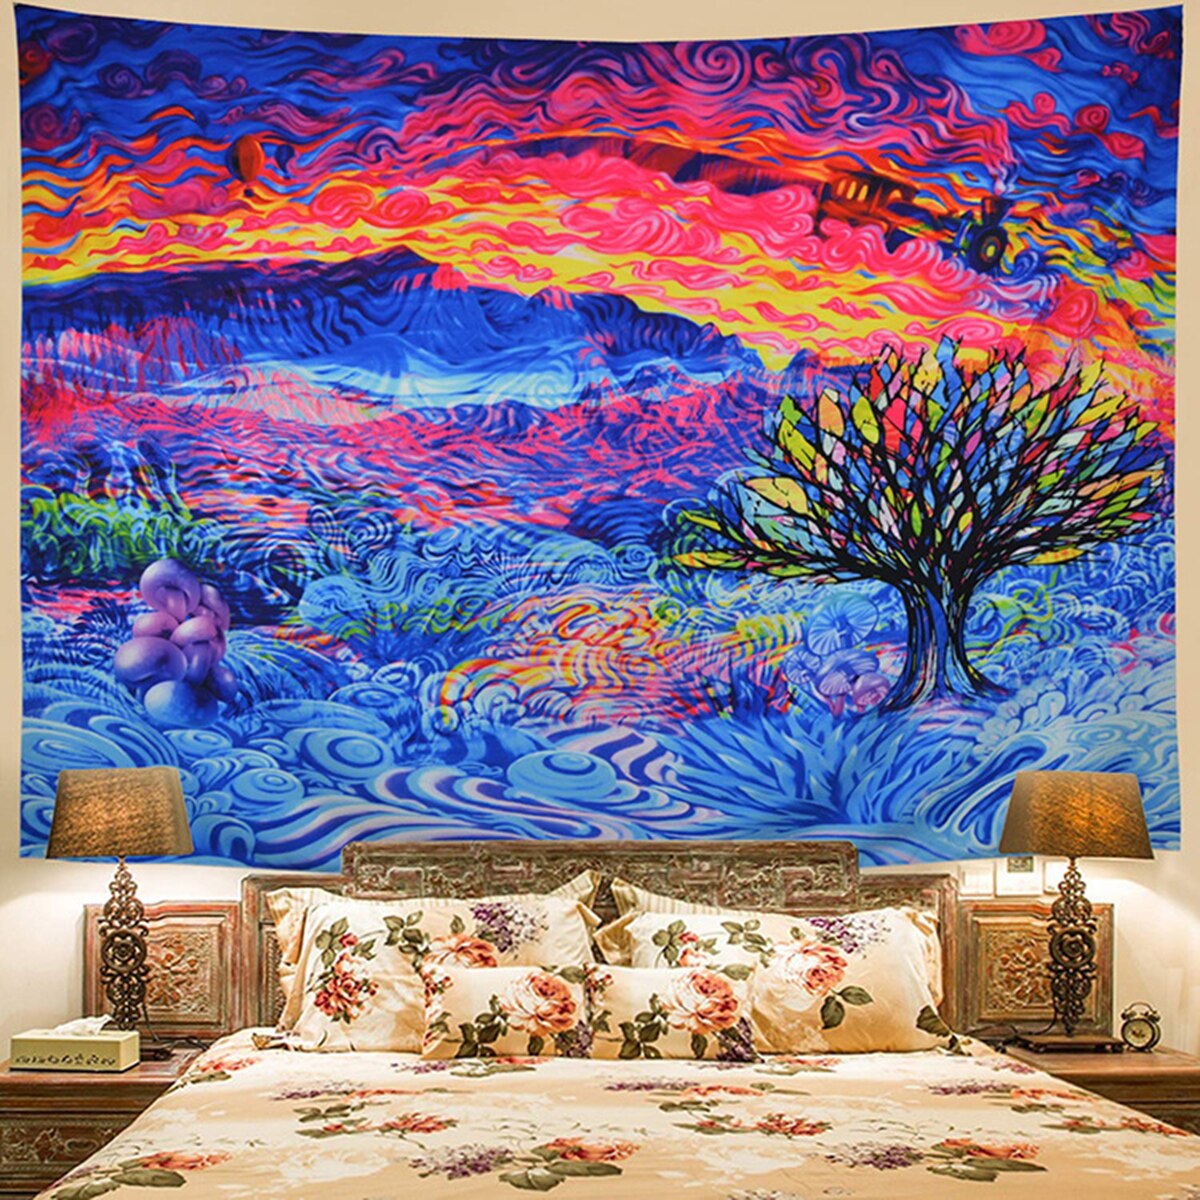 Psychedelic Tapestry Trippy Art Silk Fabric Poster Print Abstract Pictures for Living Room Bed Room Wall Picture Home Decor: 7